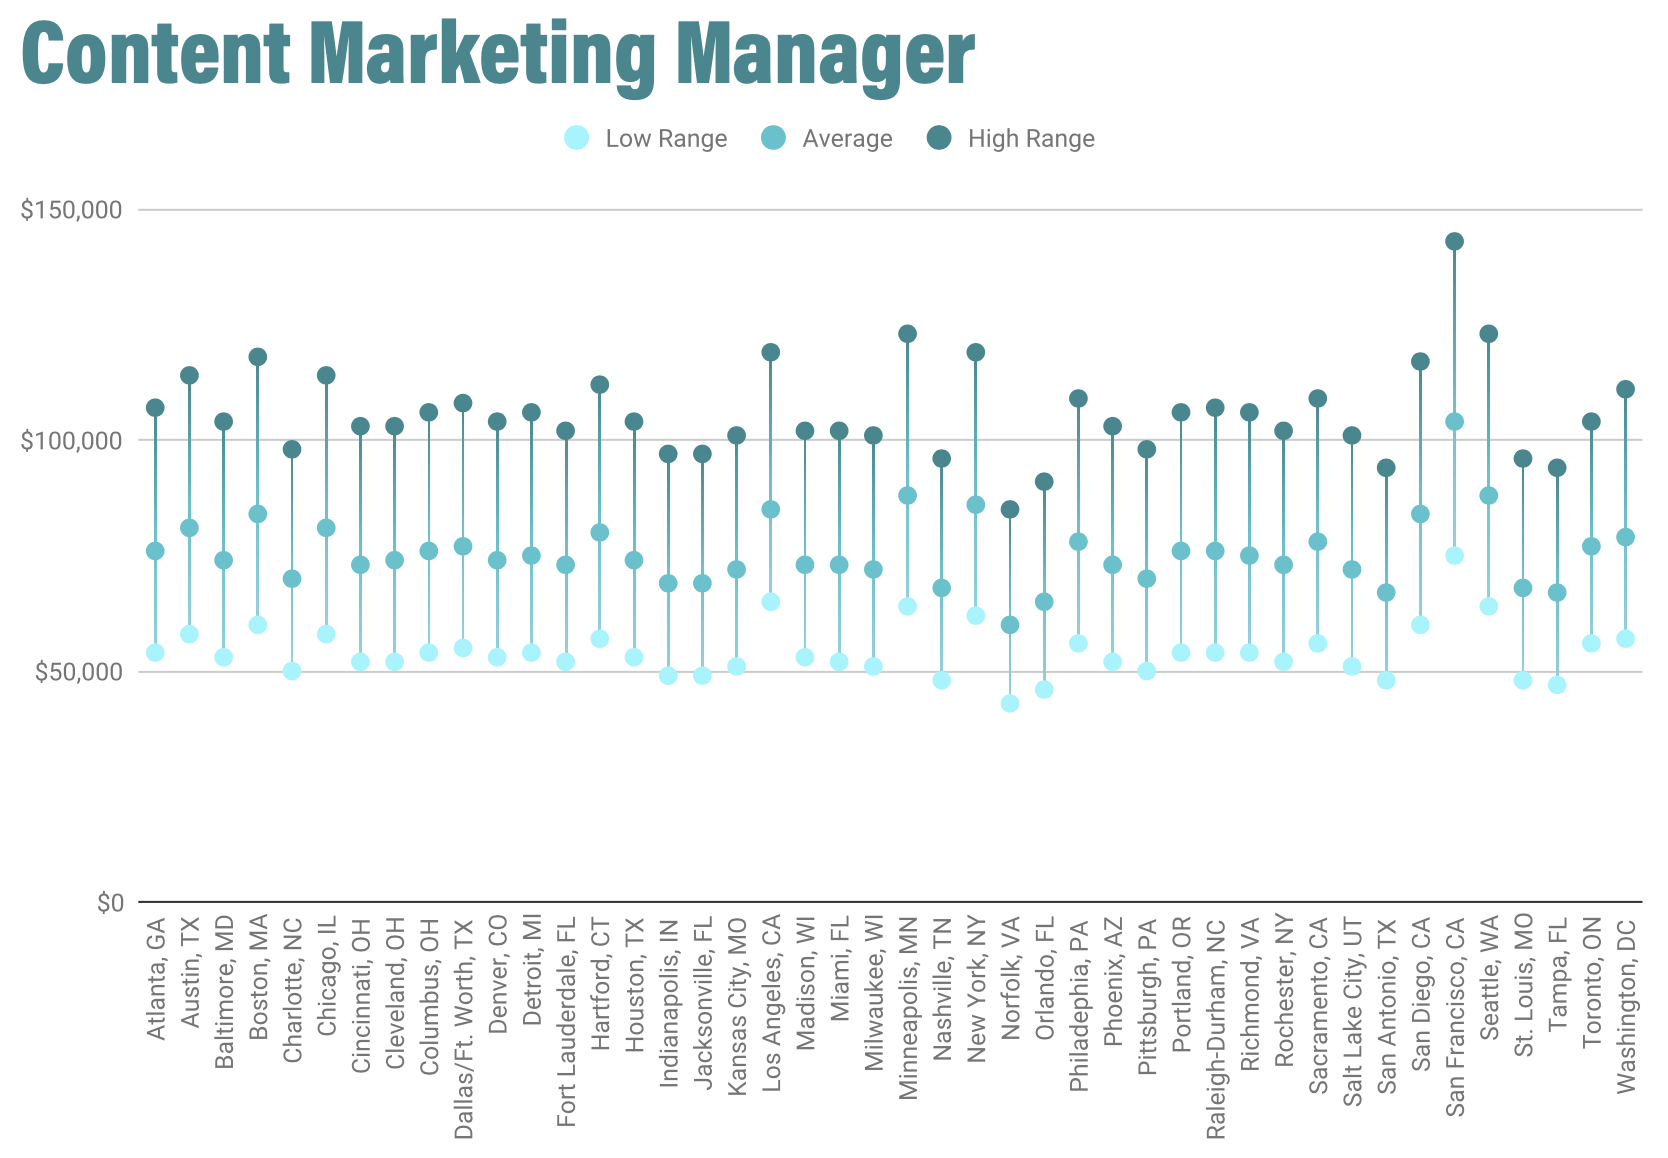 /uploads/2020/01/Content_Marketing_Manager_Salaries.png